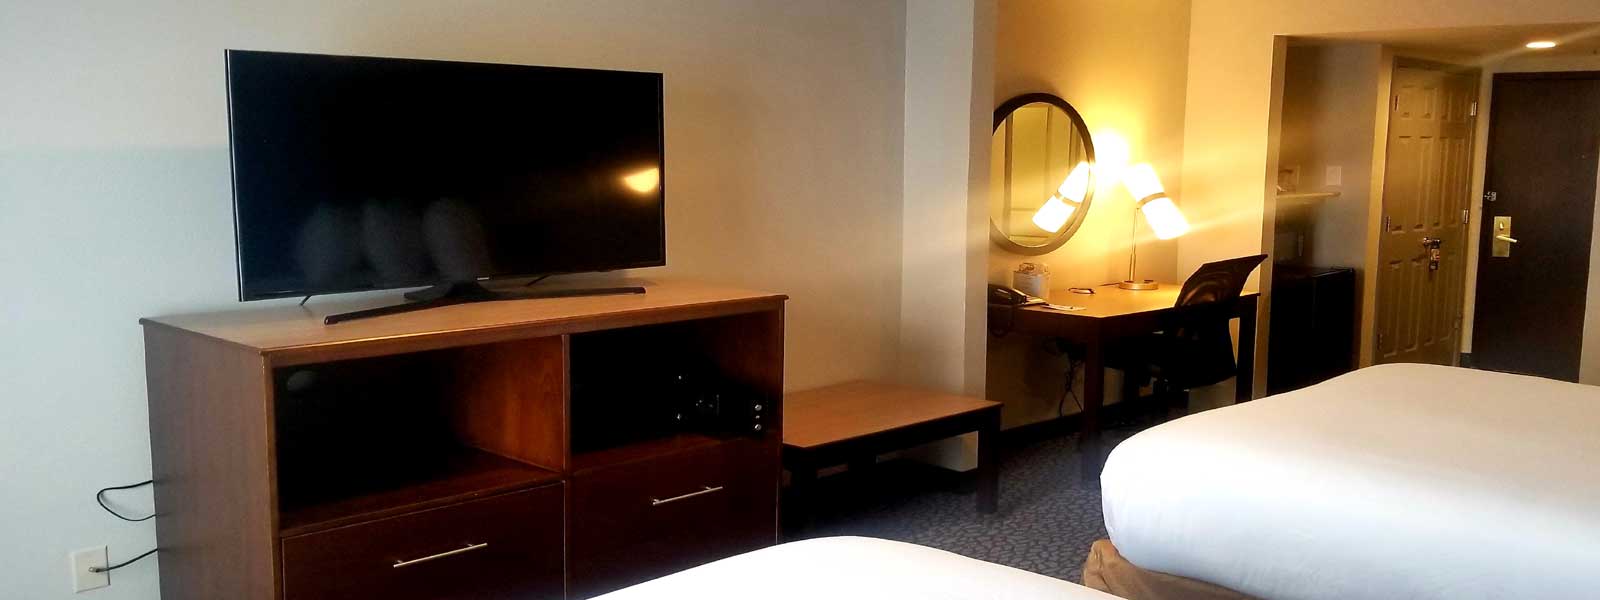 Wingate Dallas DFW Airport Affordable Lodging in Irving Texas Clean Comfortable Rooms Newly Remodeled Close to Downtown